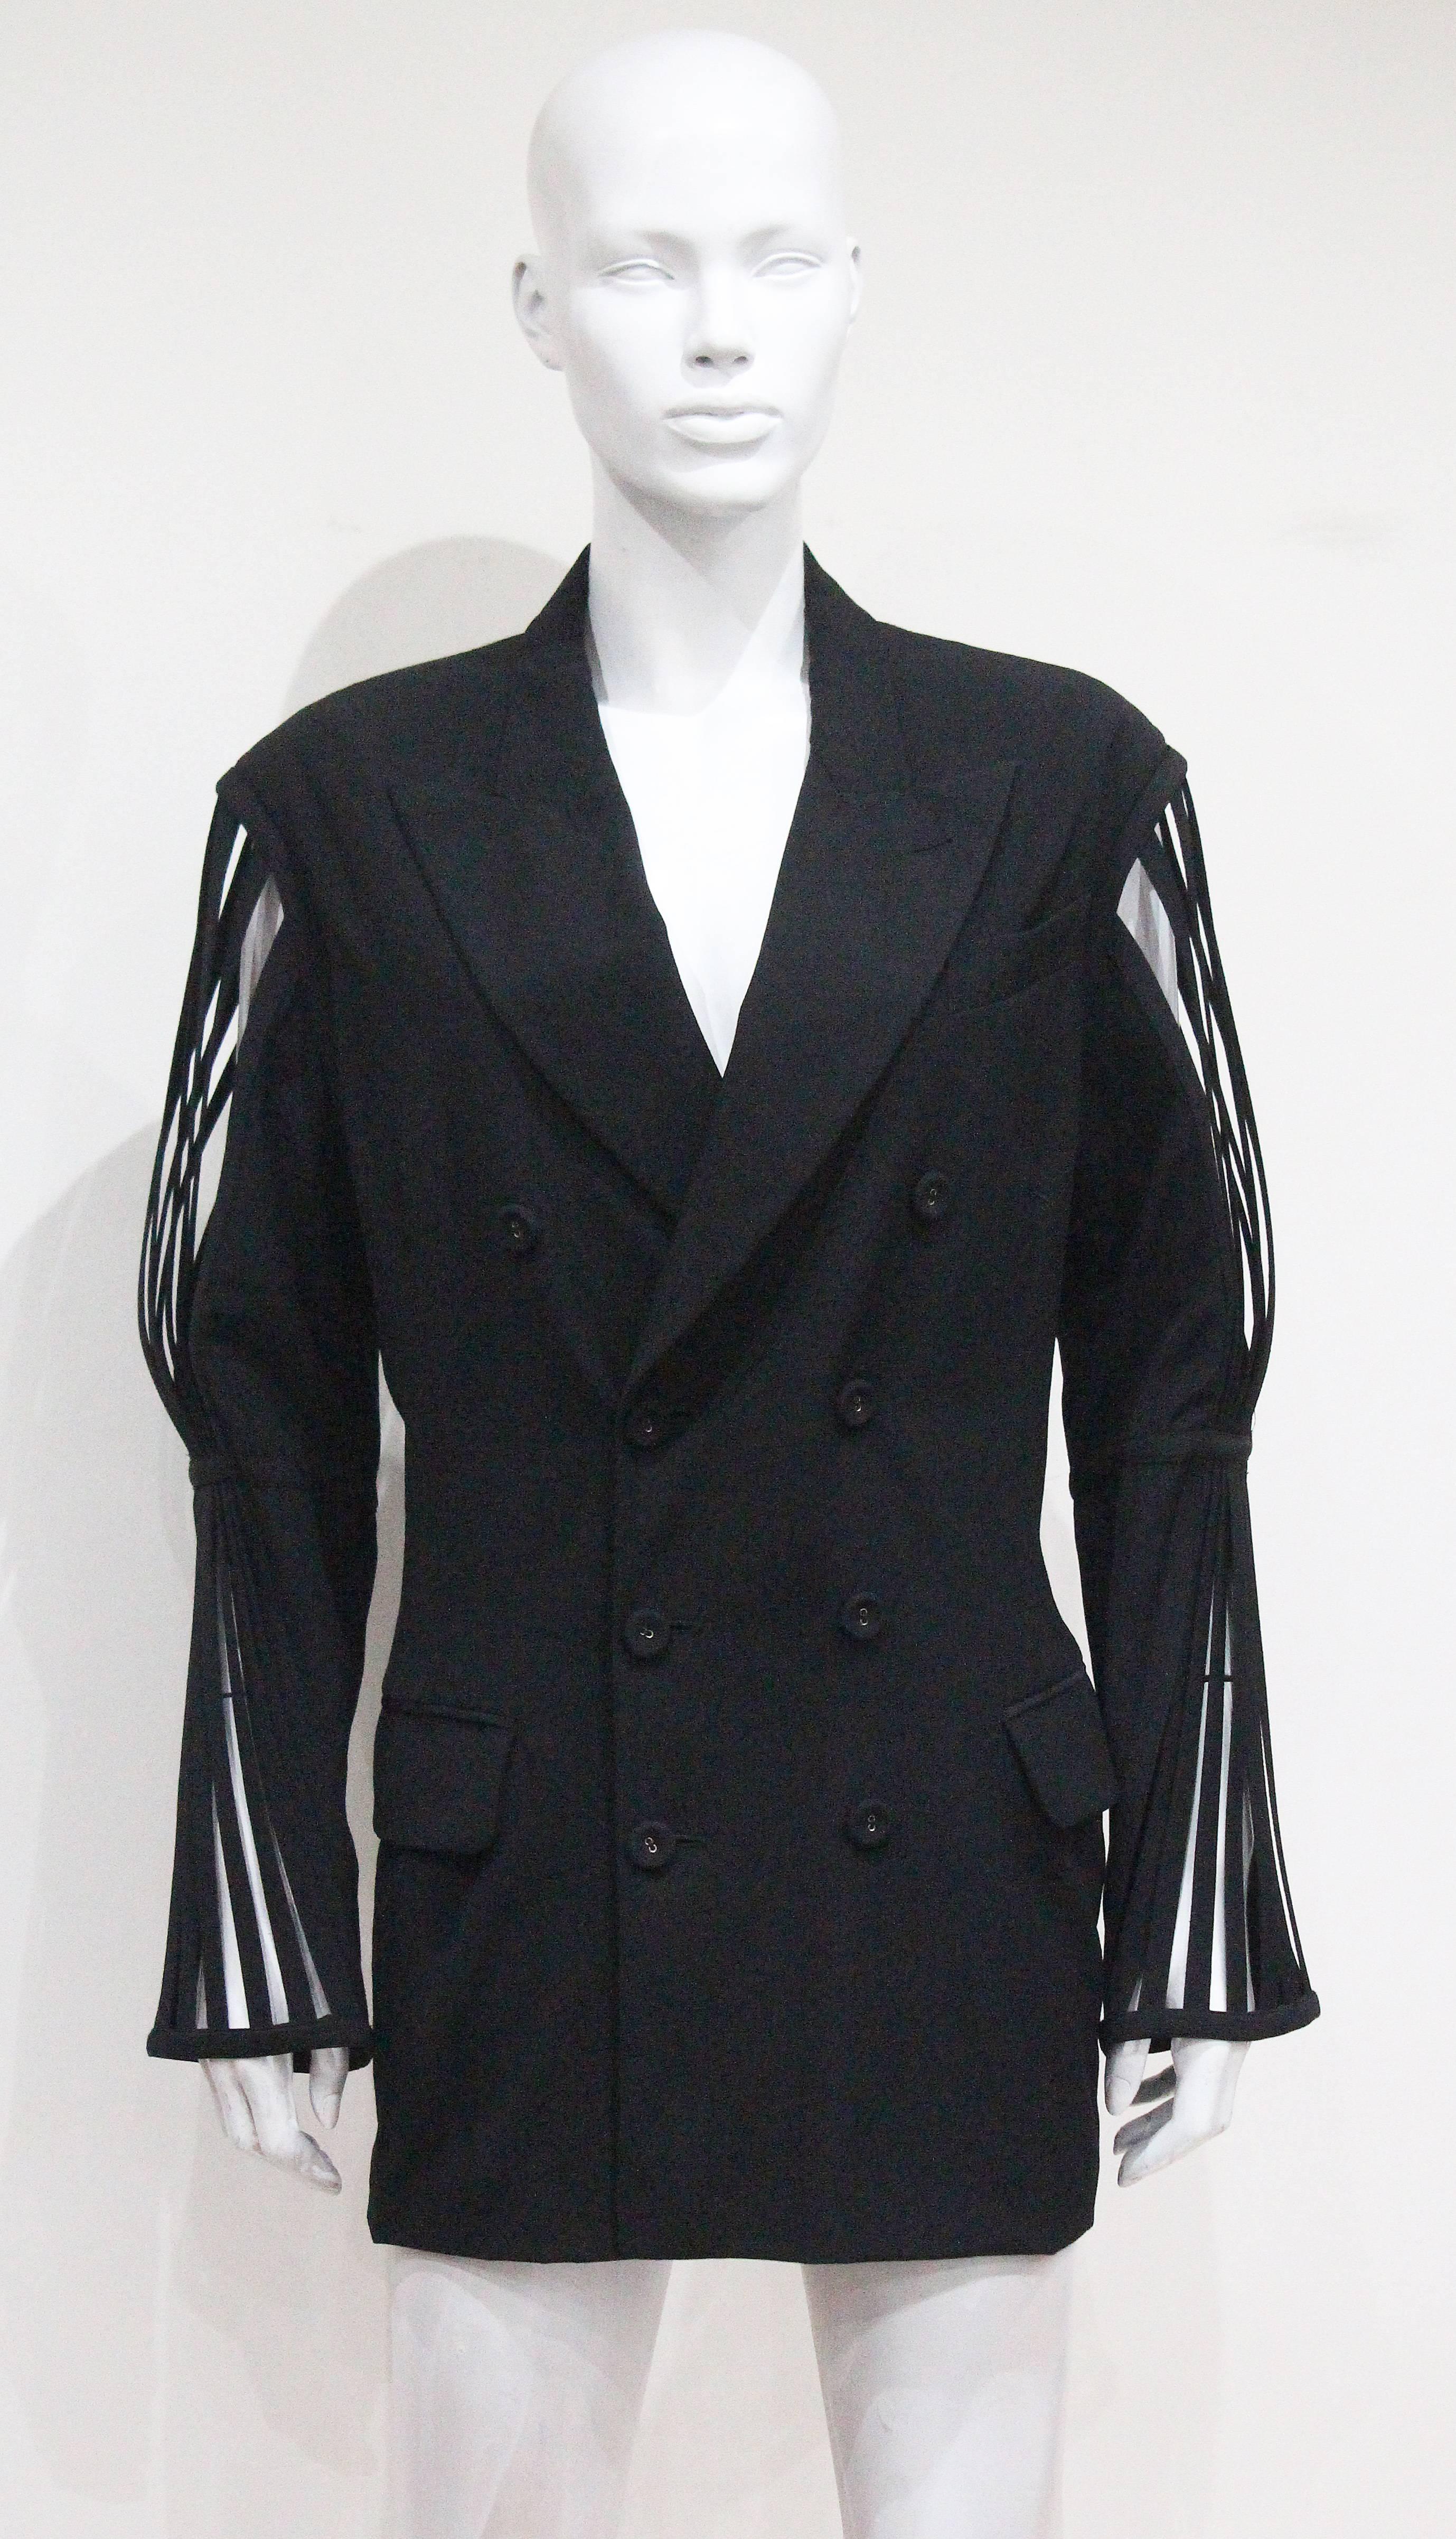 Fine and rare Jean Paul Gaultier double breasted black woollen blazer jacket, circa 1989. The blazer jacket has extraordinary caged boned sleeves. The beauty about this piece is that we believe it could be worn by a woman styled as a mini dress or